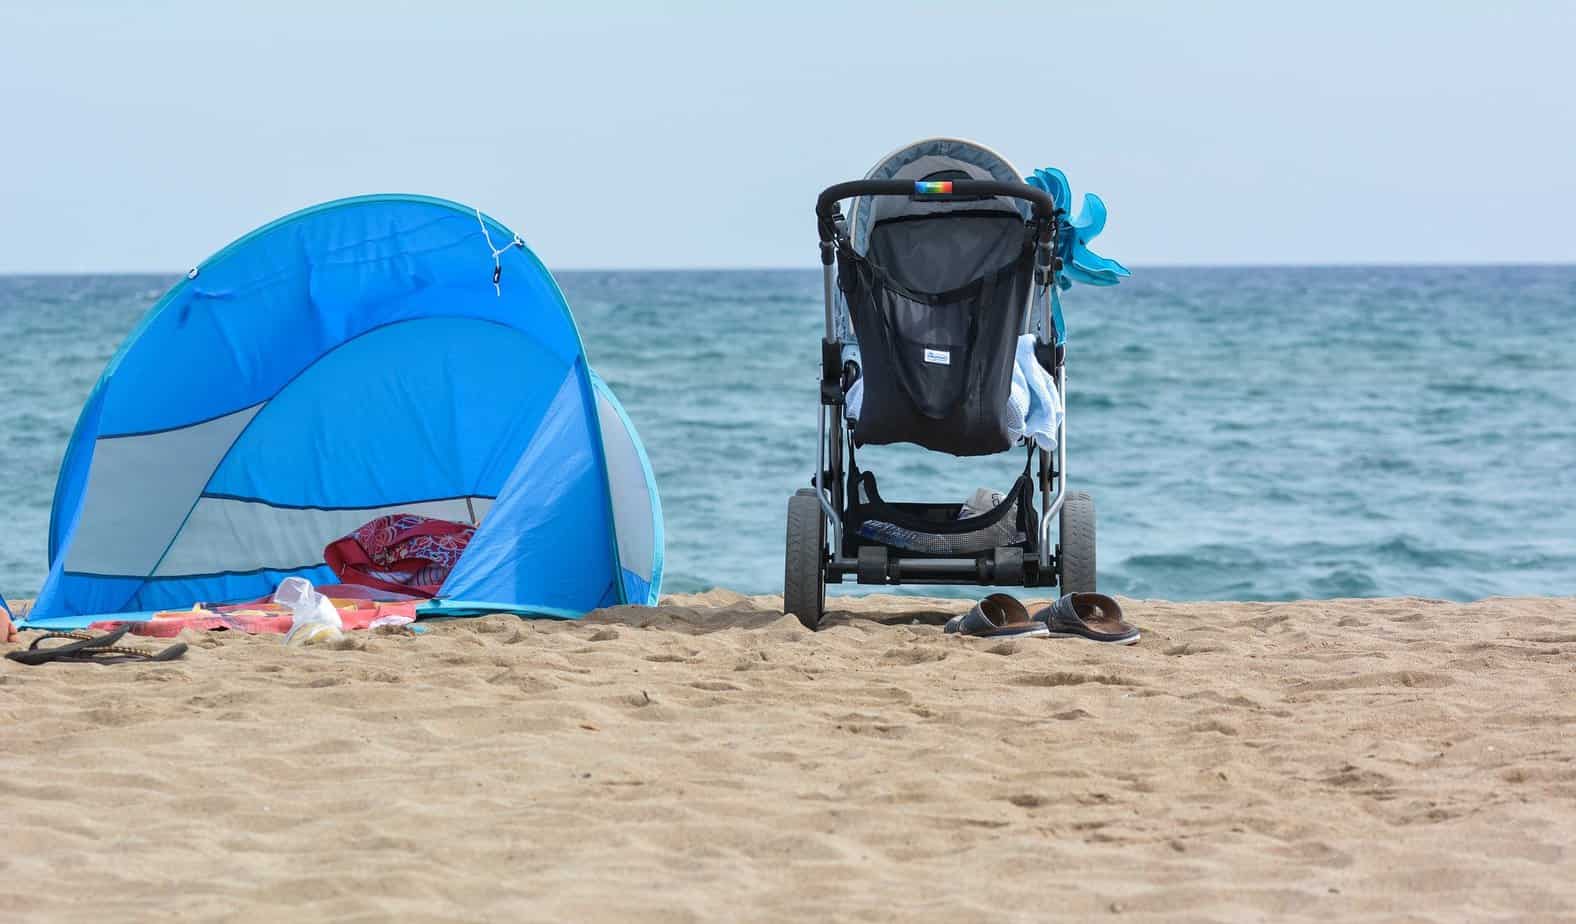 Stroller with Blanket inside standing on the beach near the blue tent